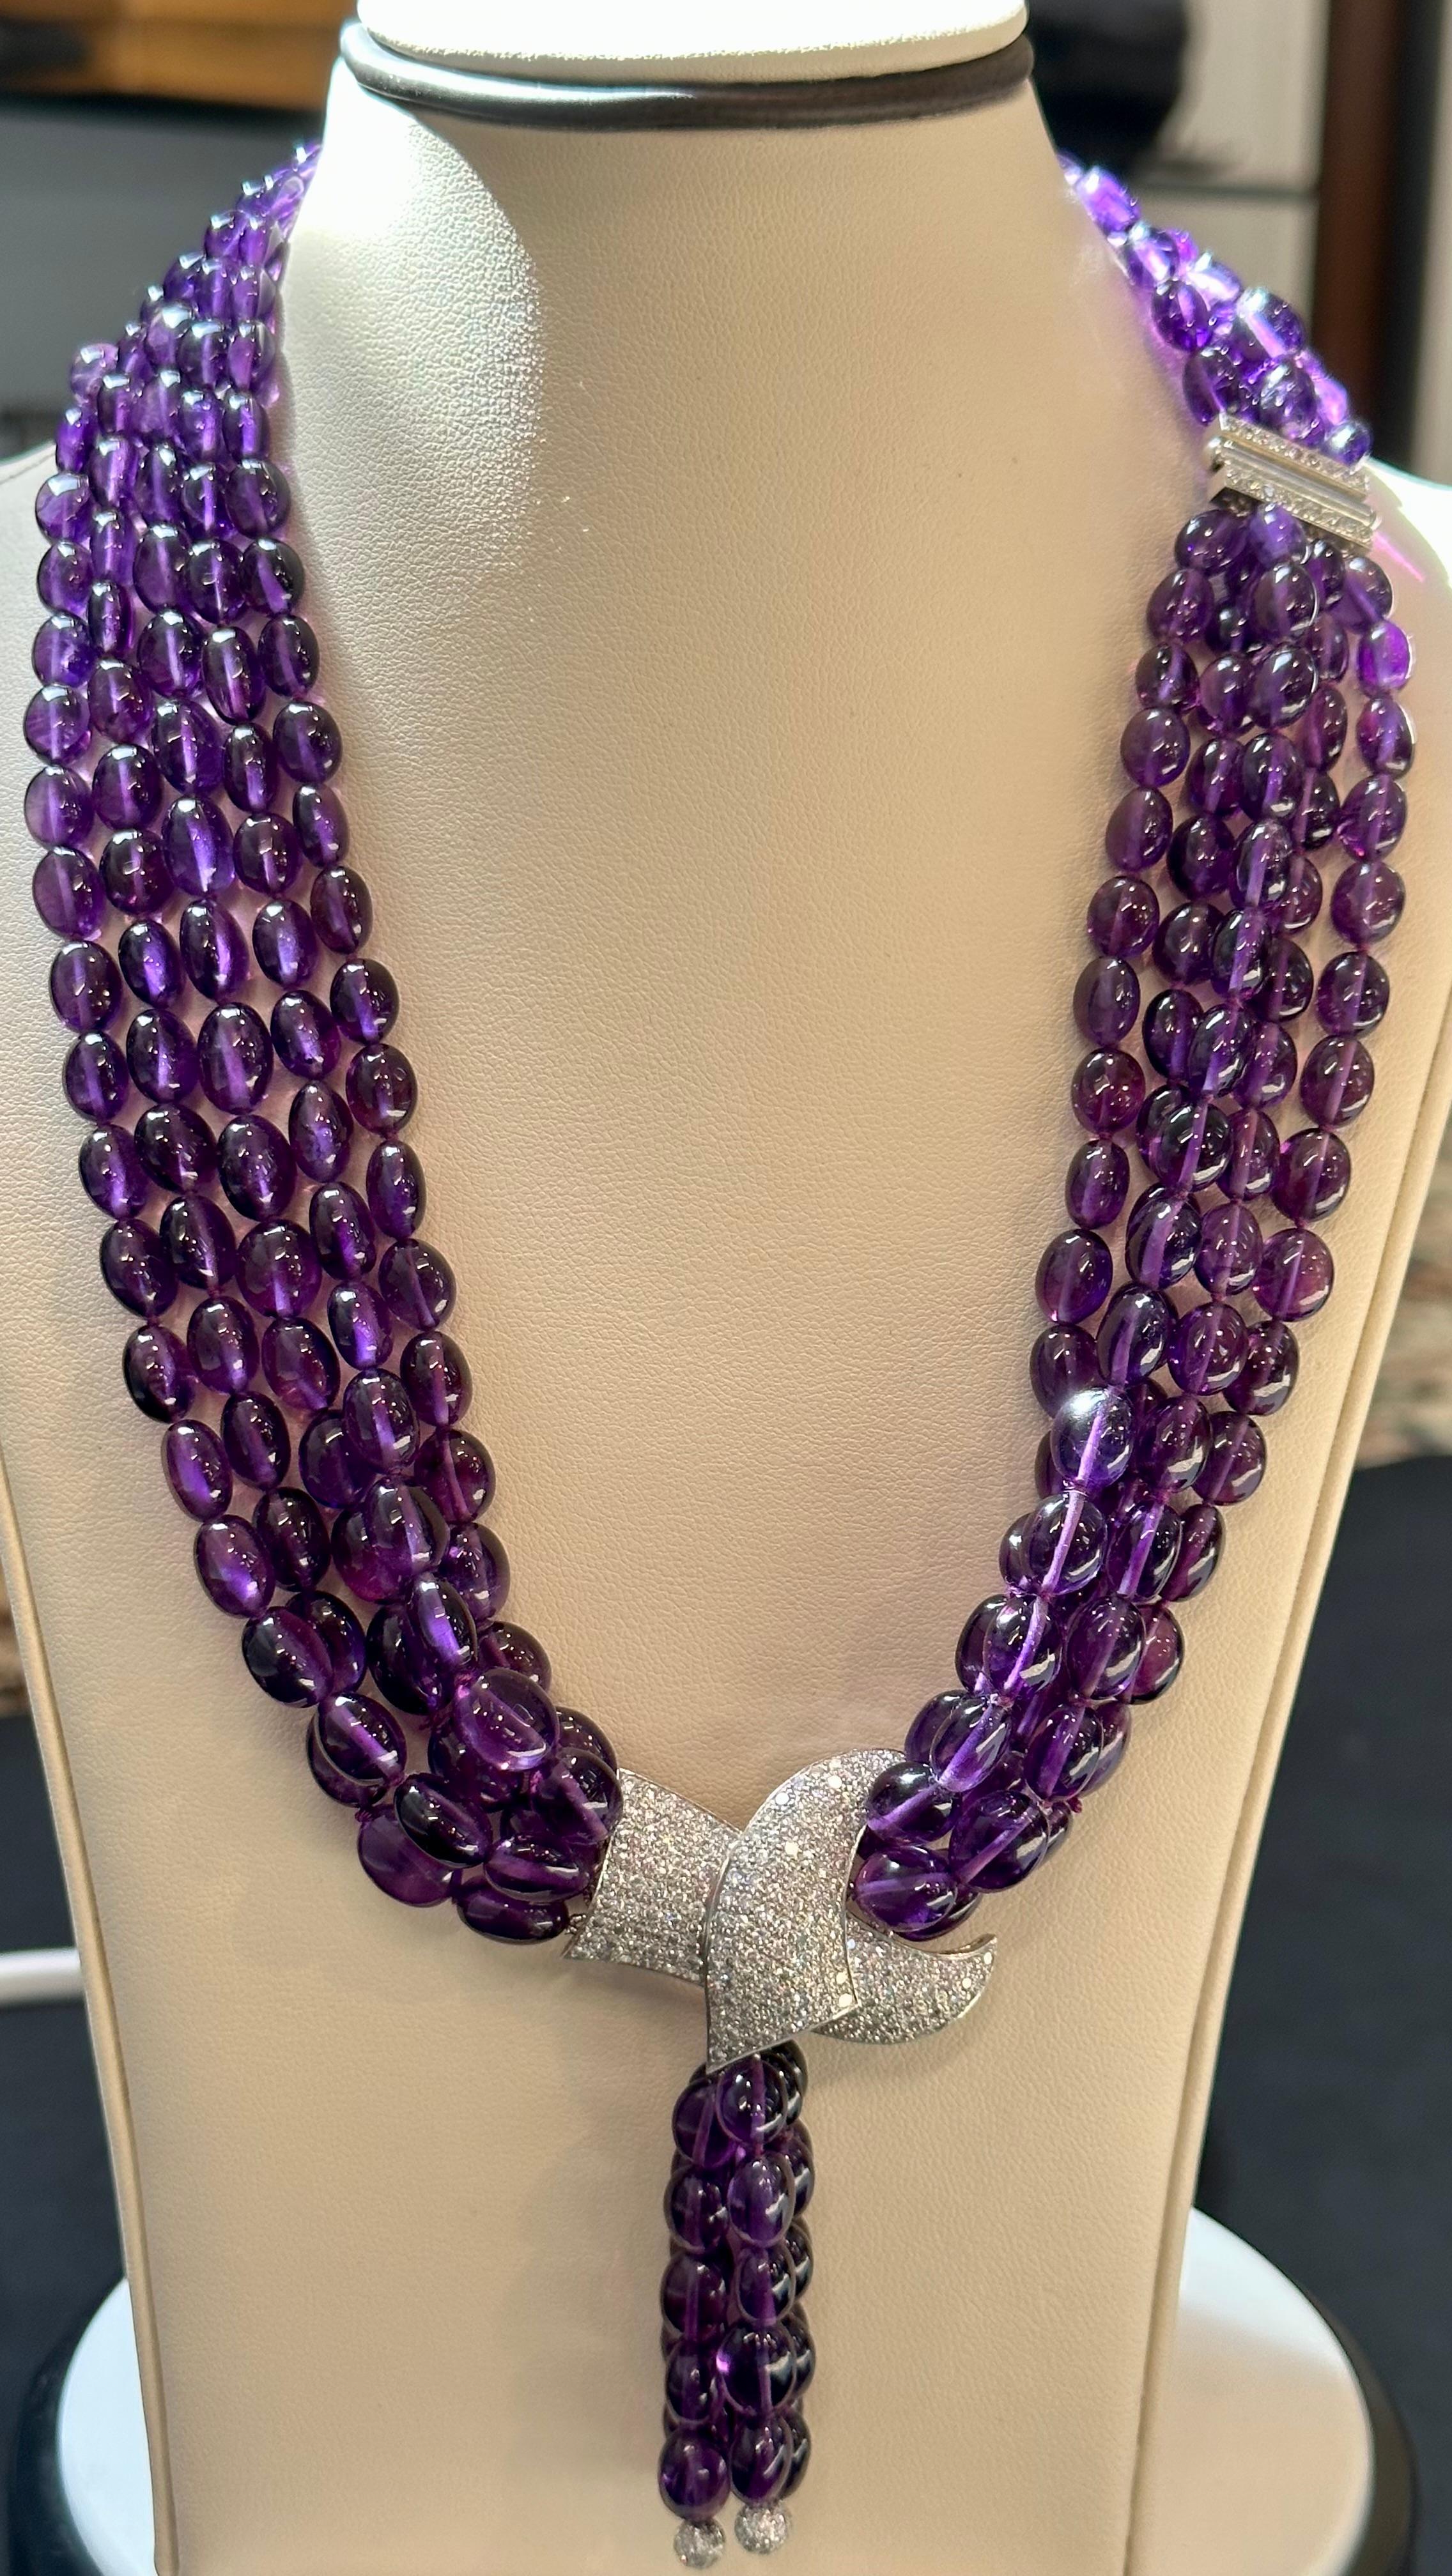 700 Ct Natural Amethyst Multi Layer Bead Necklace in Platinum with 9 Ct Diamonds For Sale 11